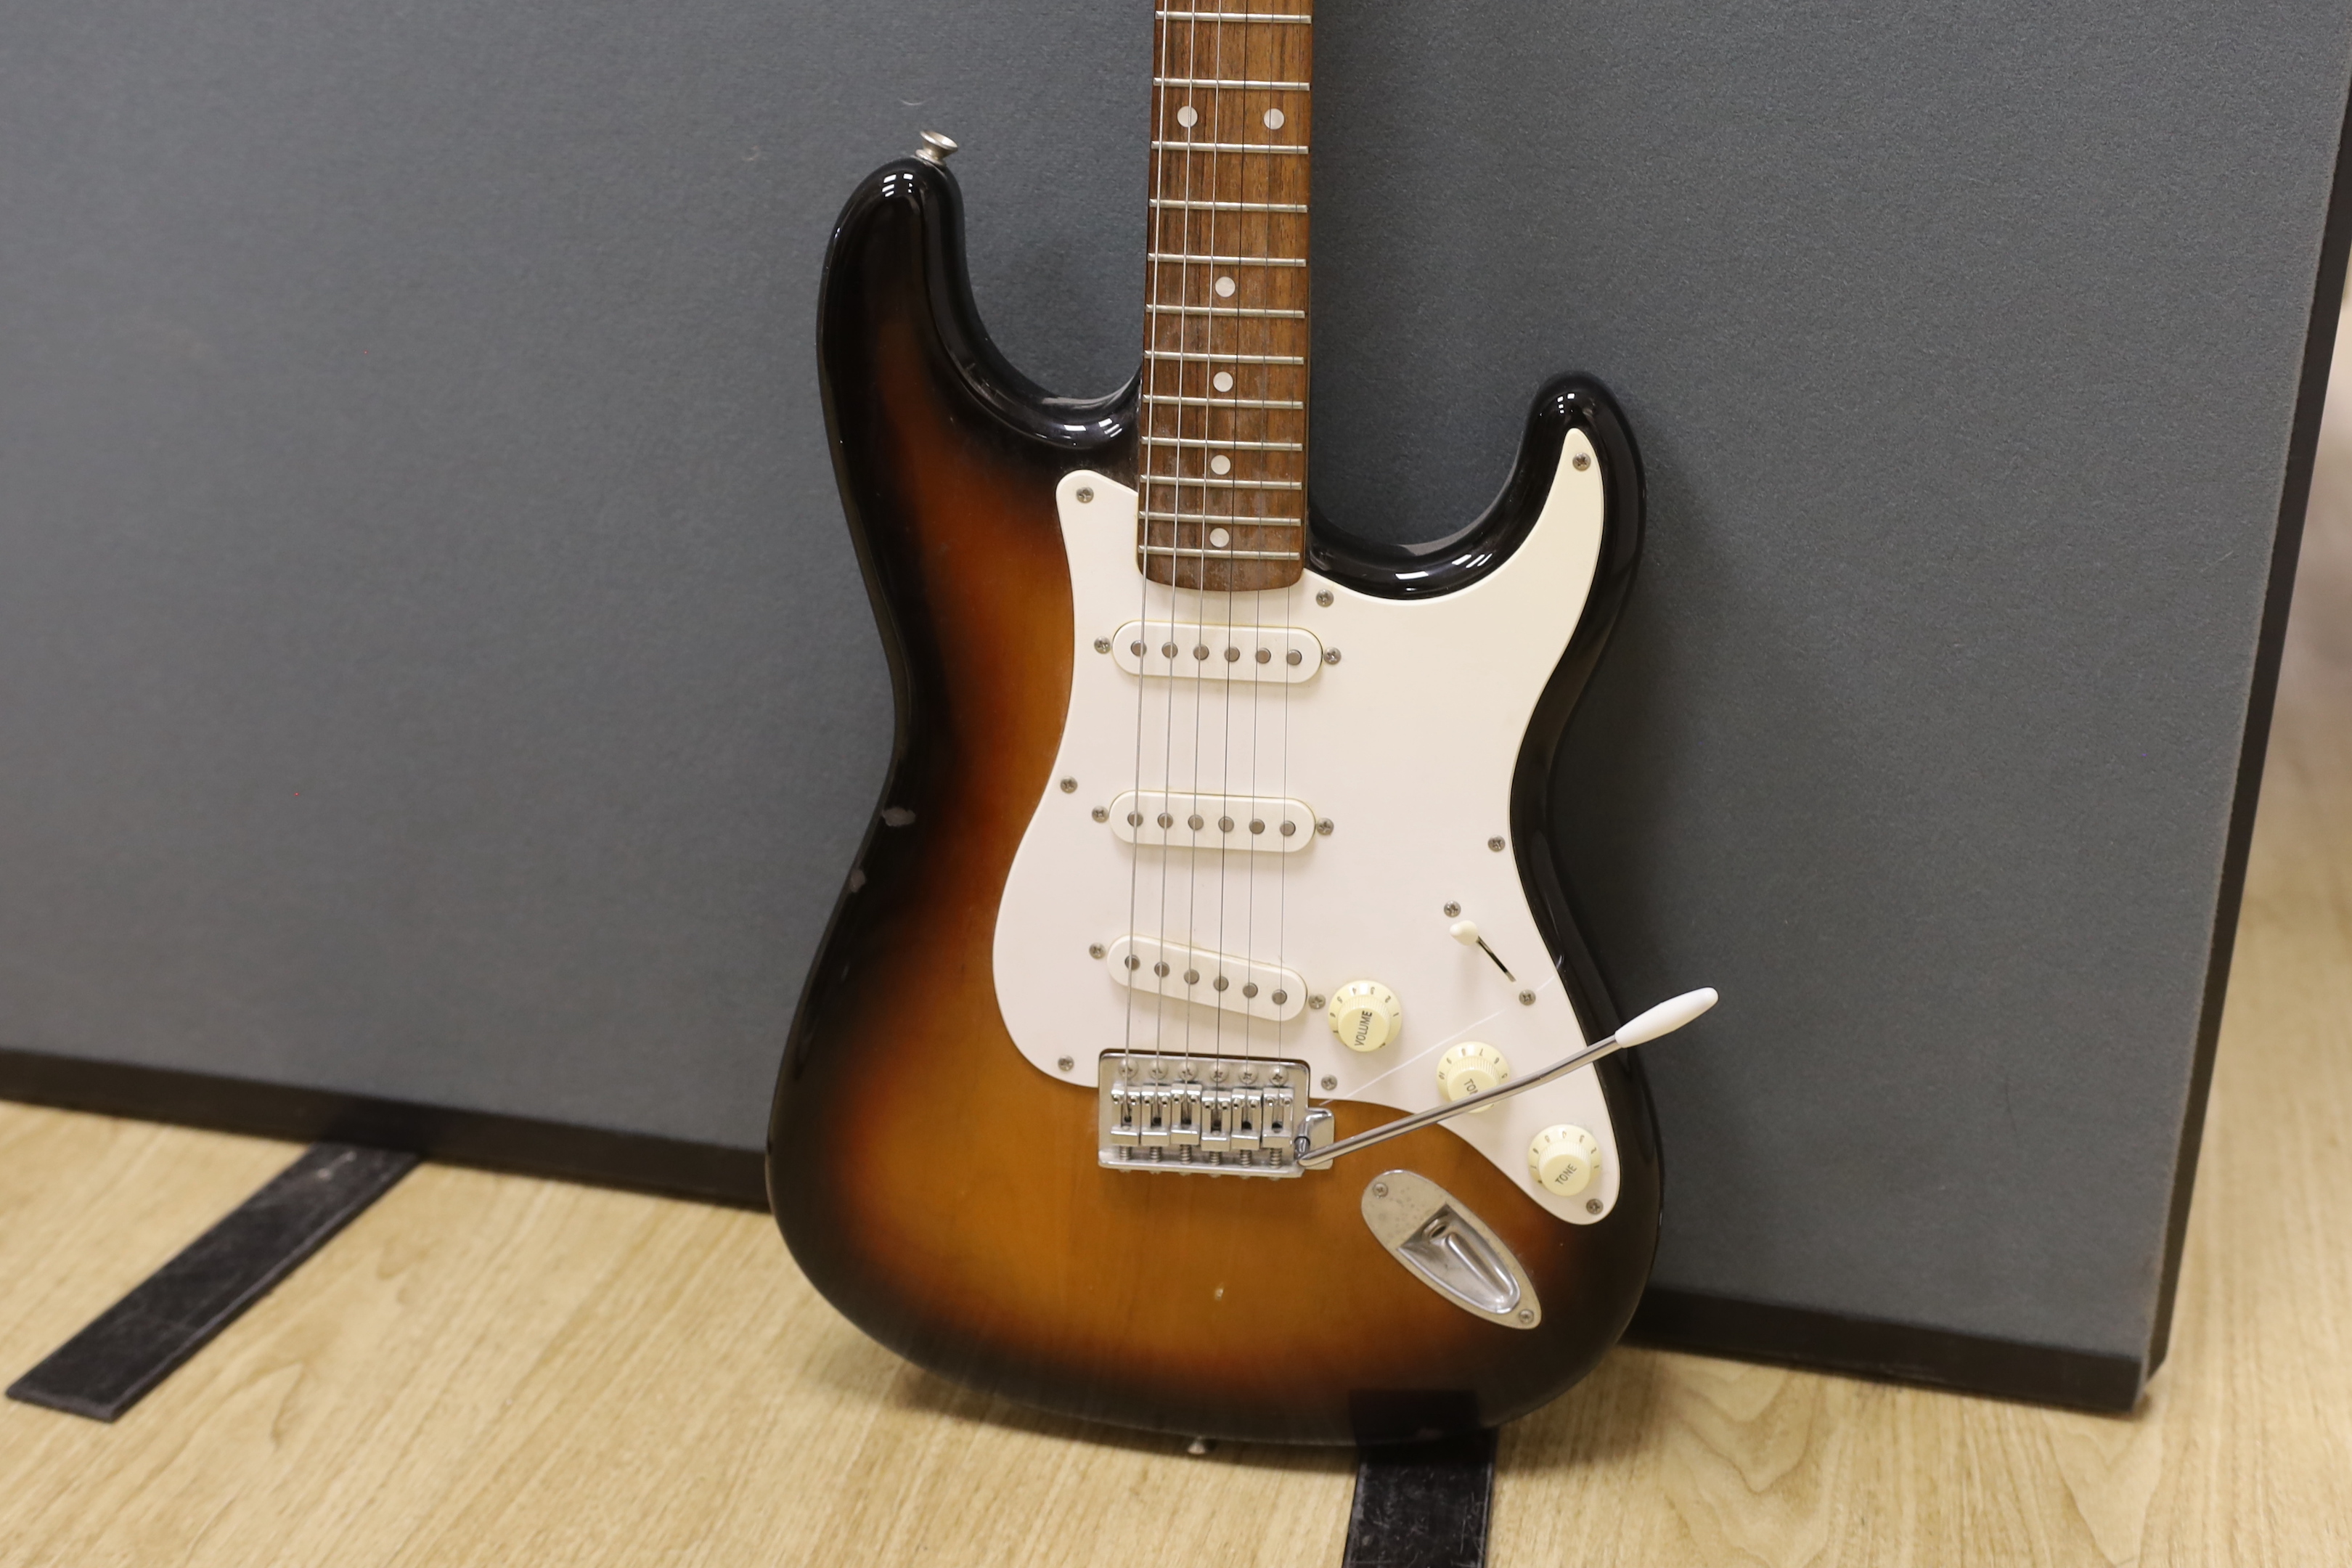 A Fender Squier 20th anniversary electric guitar with soft case